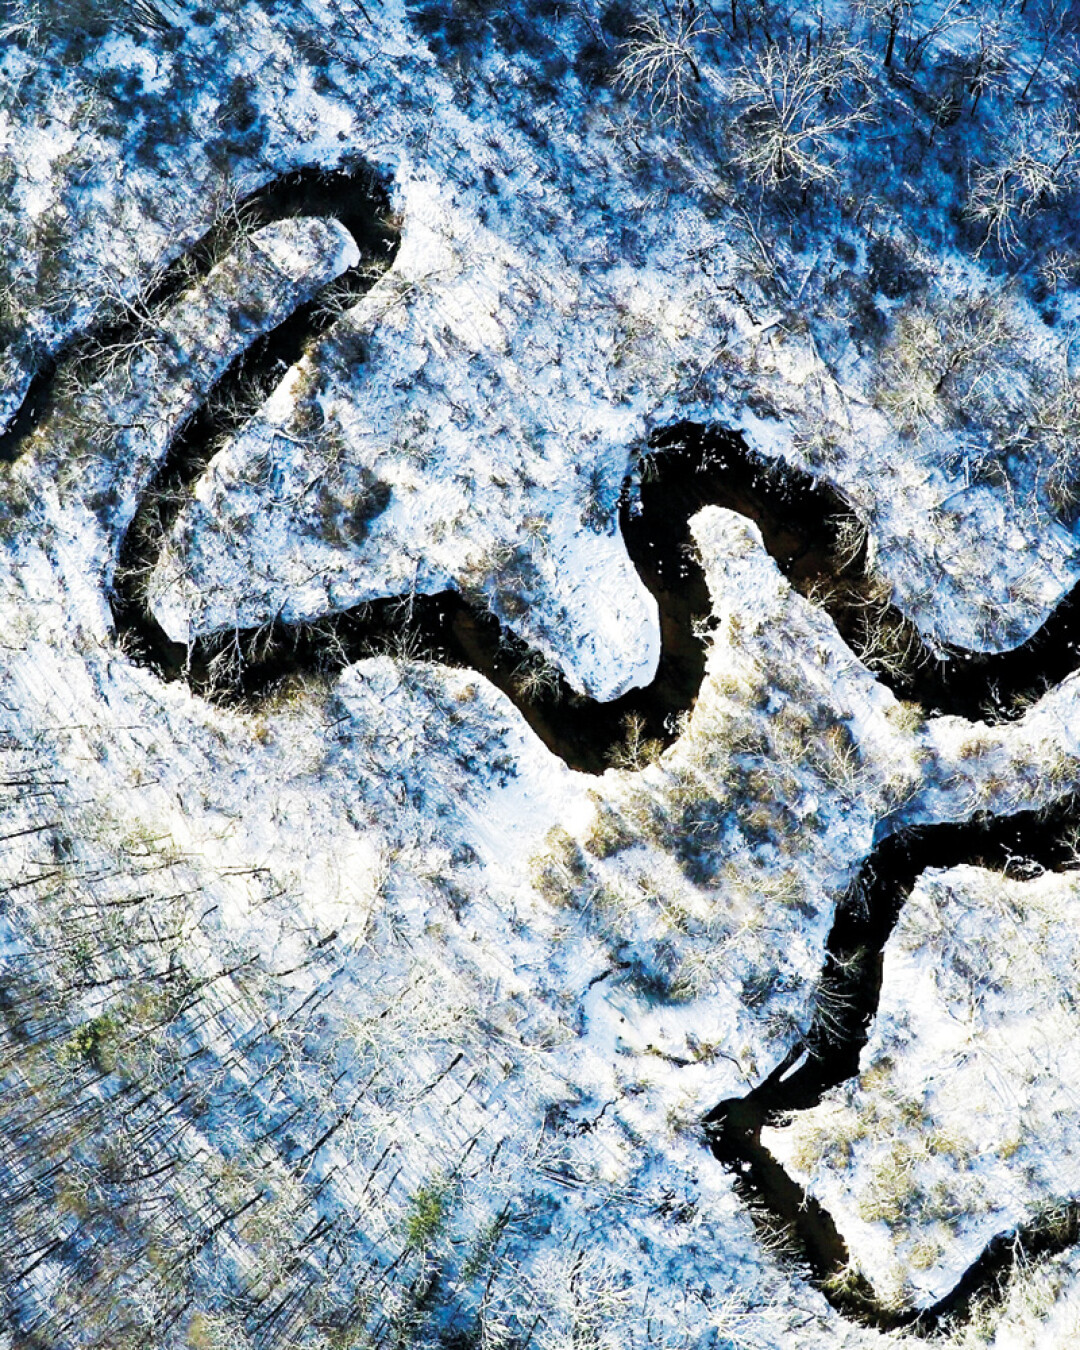 A RIVER TWISTS THROUGH IT. Part of his “Frosty Mini Series,” photographer Nick Uthe wanted to show Wisconsin from a new perspective, using a drone to capture some local landscape at Lowes Creek County Park, shown here. Uthe says, “This was a small tribute to the state I love.” Instagram: @nickuthe